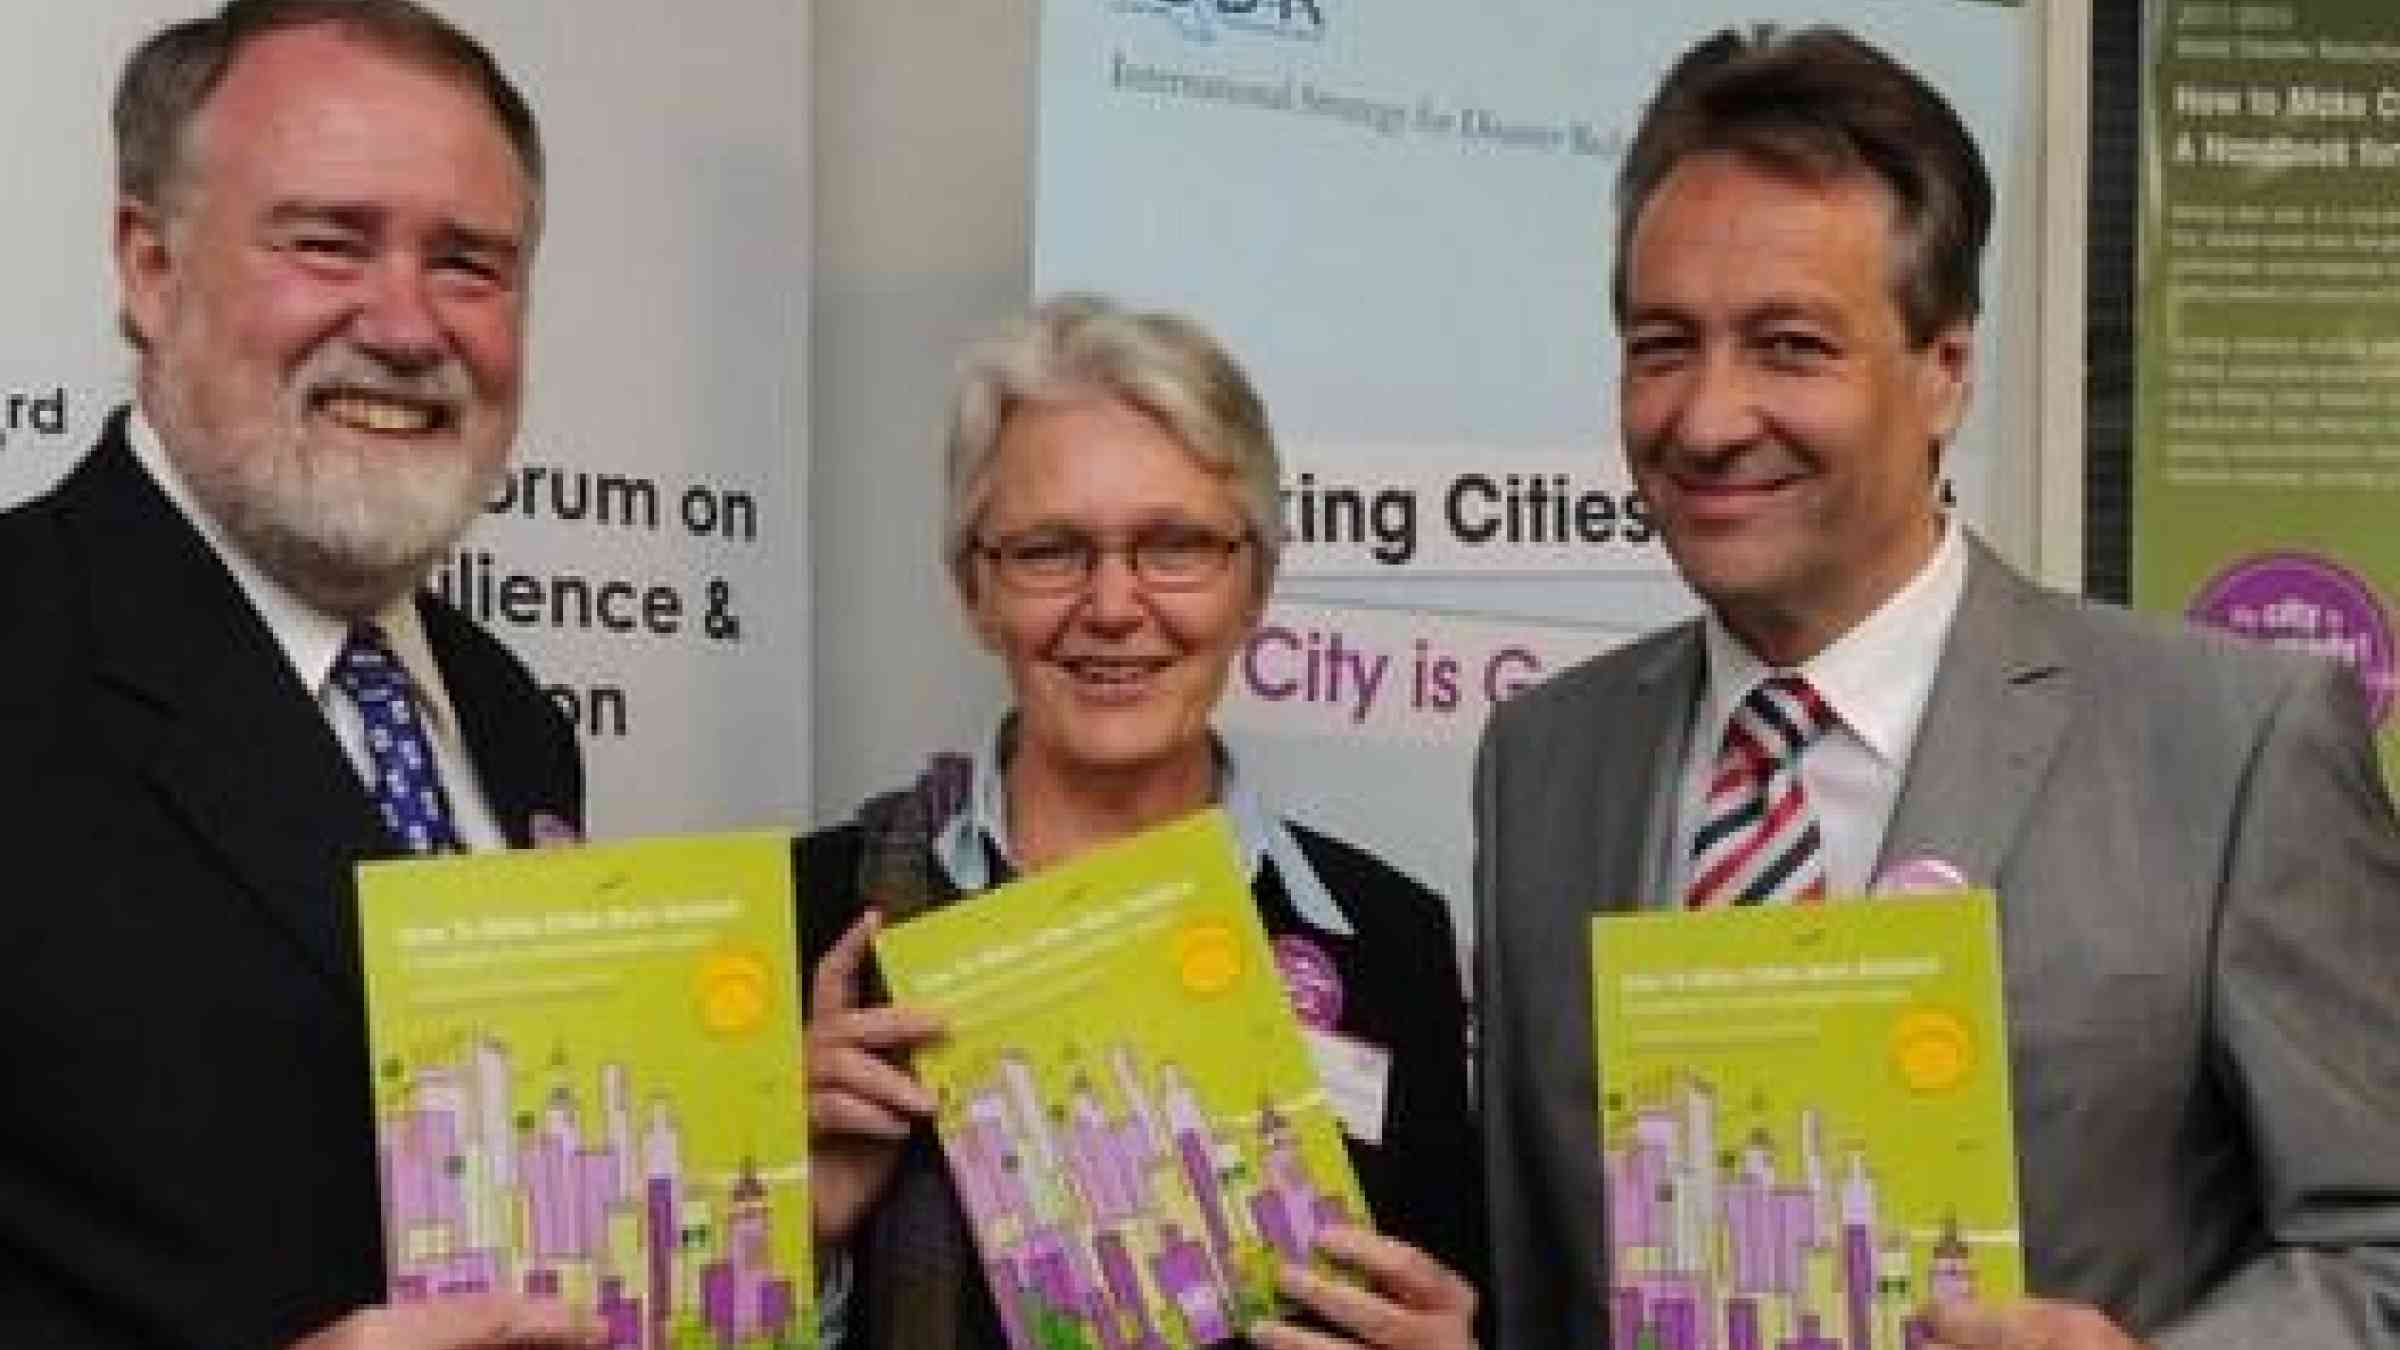 From left: David Cadman, President of ICLEI, Margareta Wahlström, UN Special Representative for Disaster Risk Reduction, and Jürgen Nimptsch, Mayor of Bonn, hold up the recently launched  "How to Make Cities More Resilient - A Handbook for Local Government".